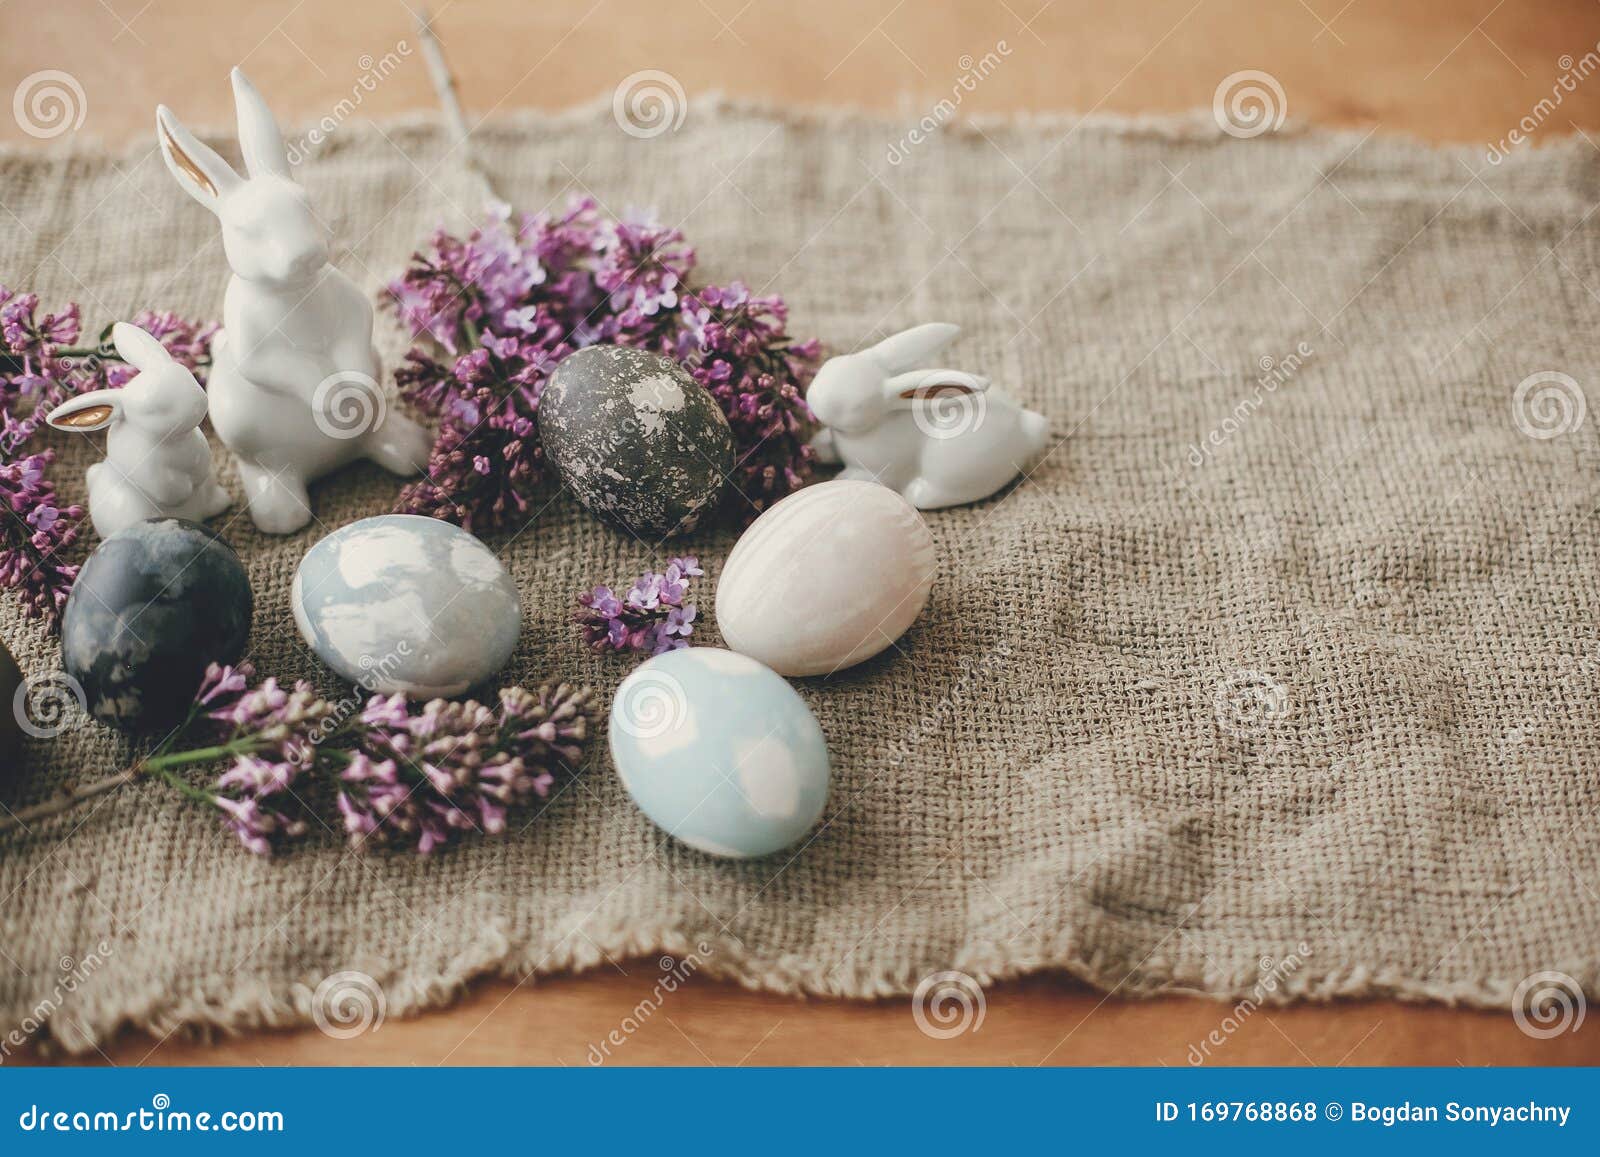 Happy Easter. Rural Still Life. Modern Easter Eggs, White Bunnies and ...